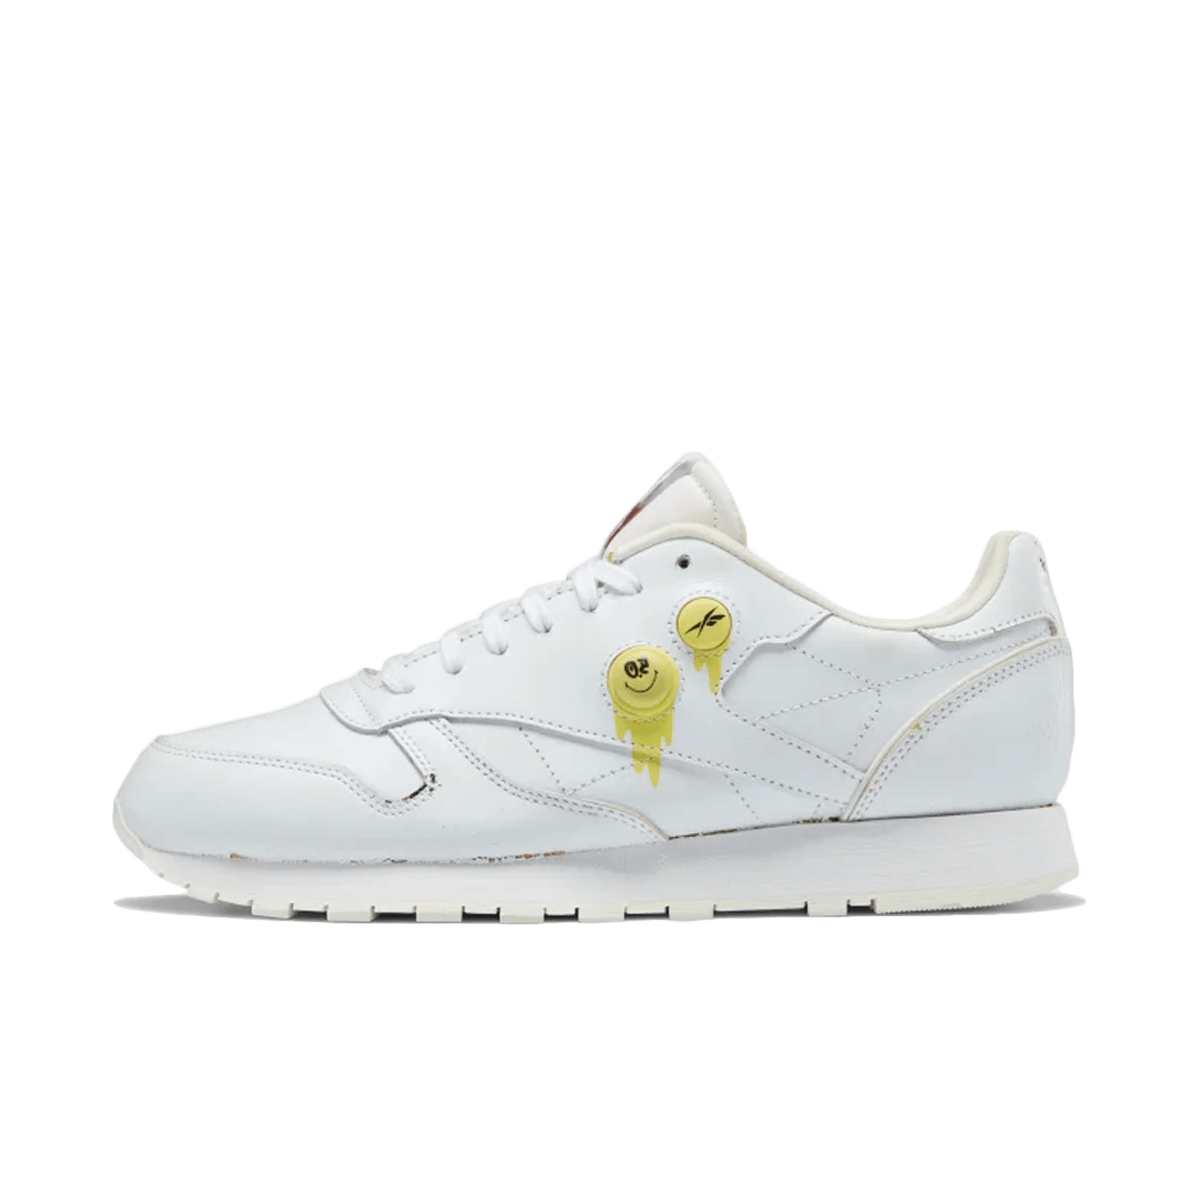 Reebok Classic Leather Pump 50th Anniversary Smiley